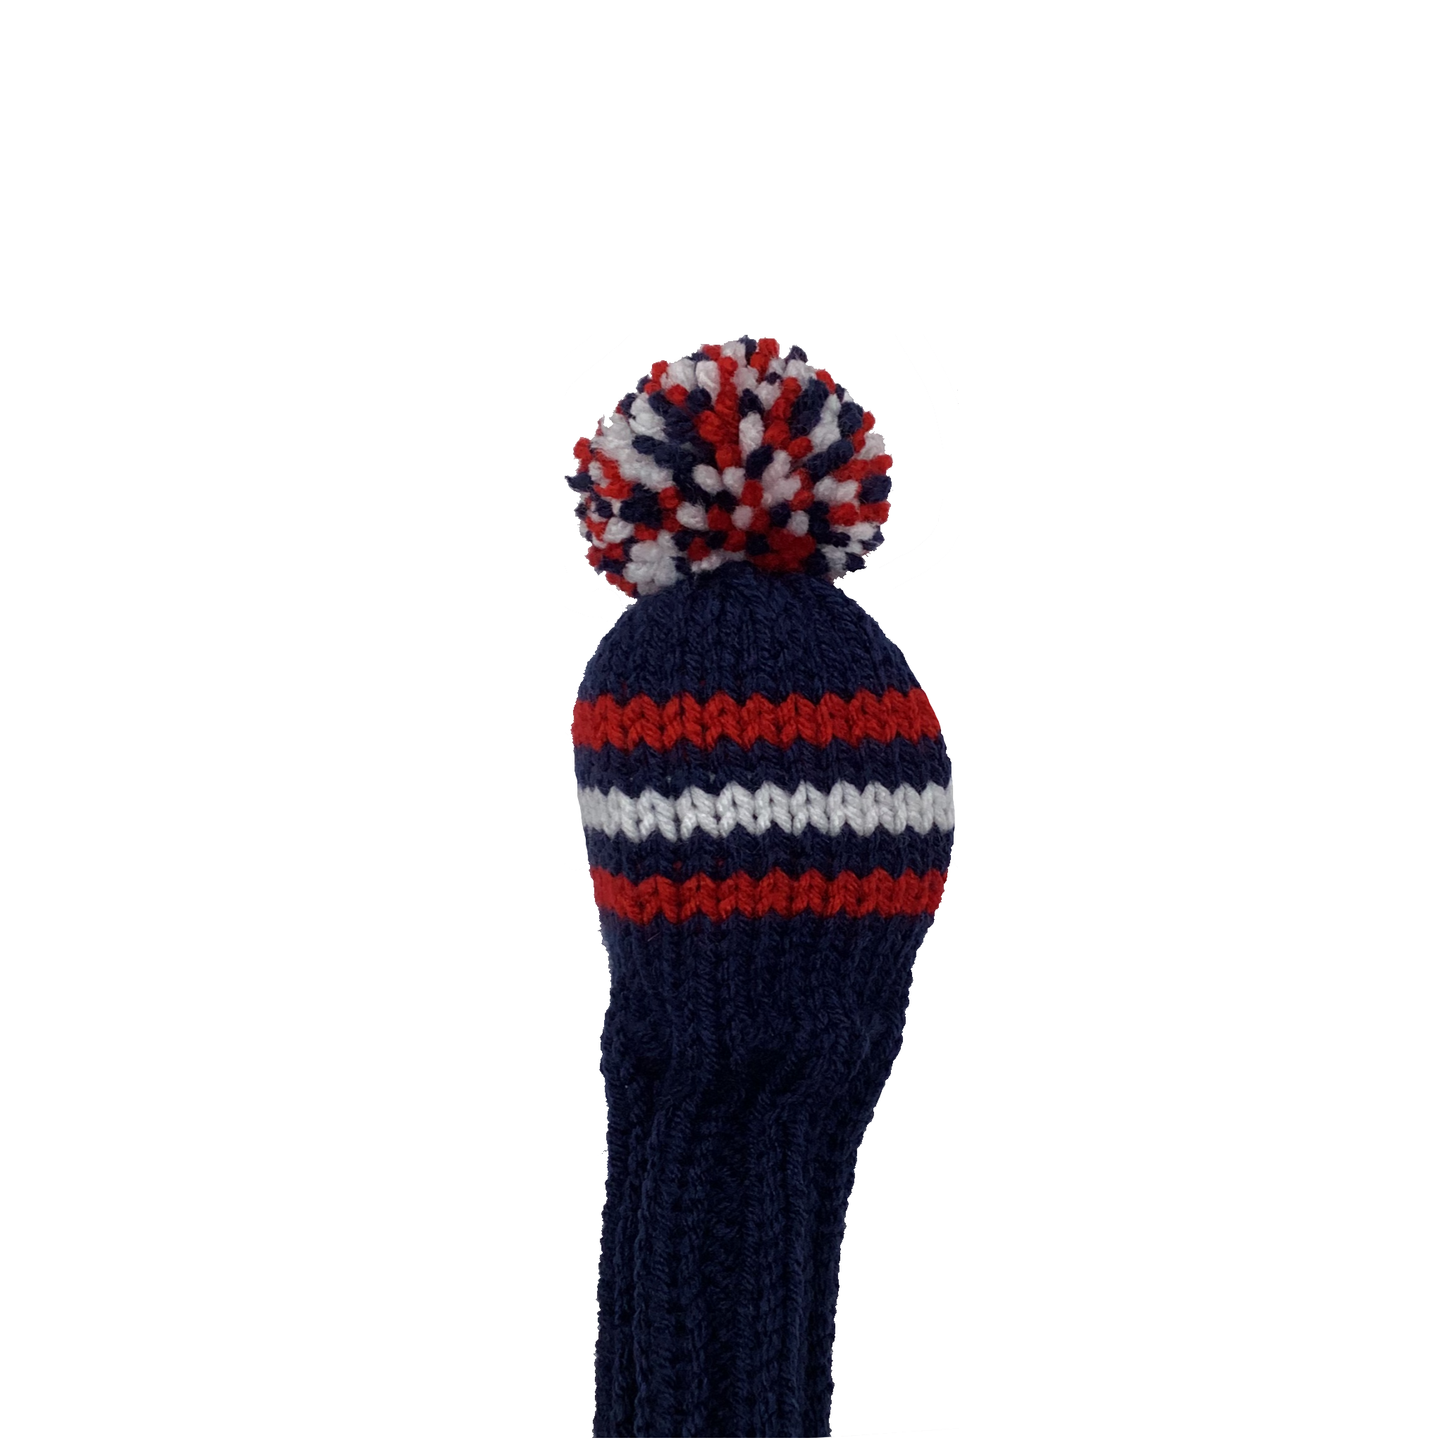 Navy, Red and White - Hybrid #3 Headcover